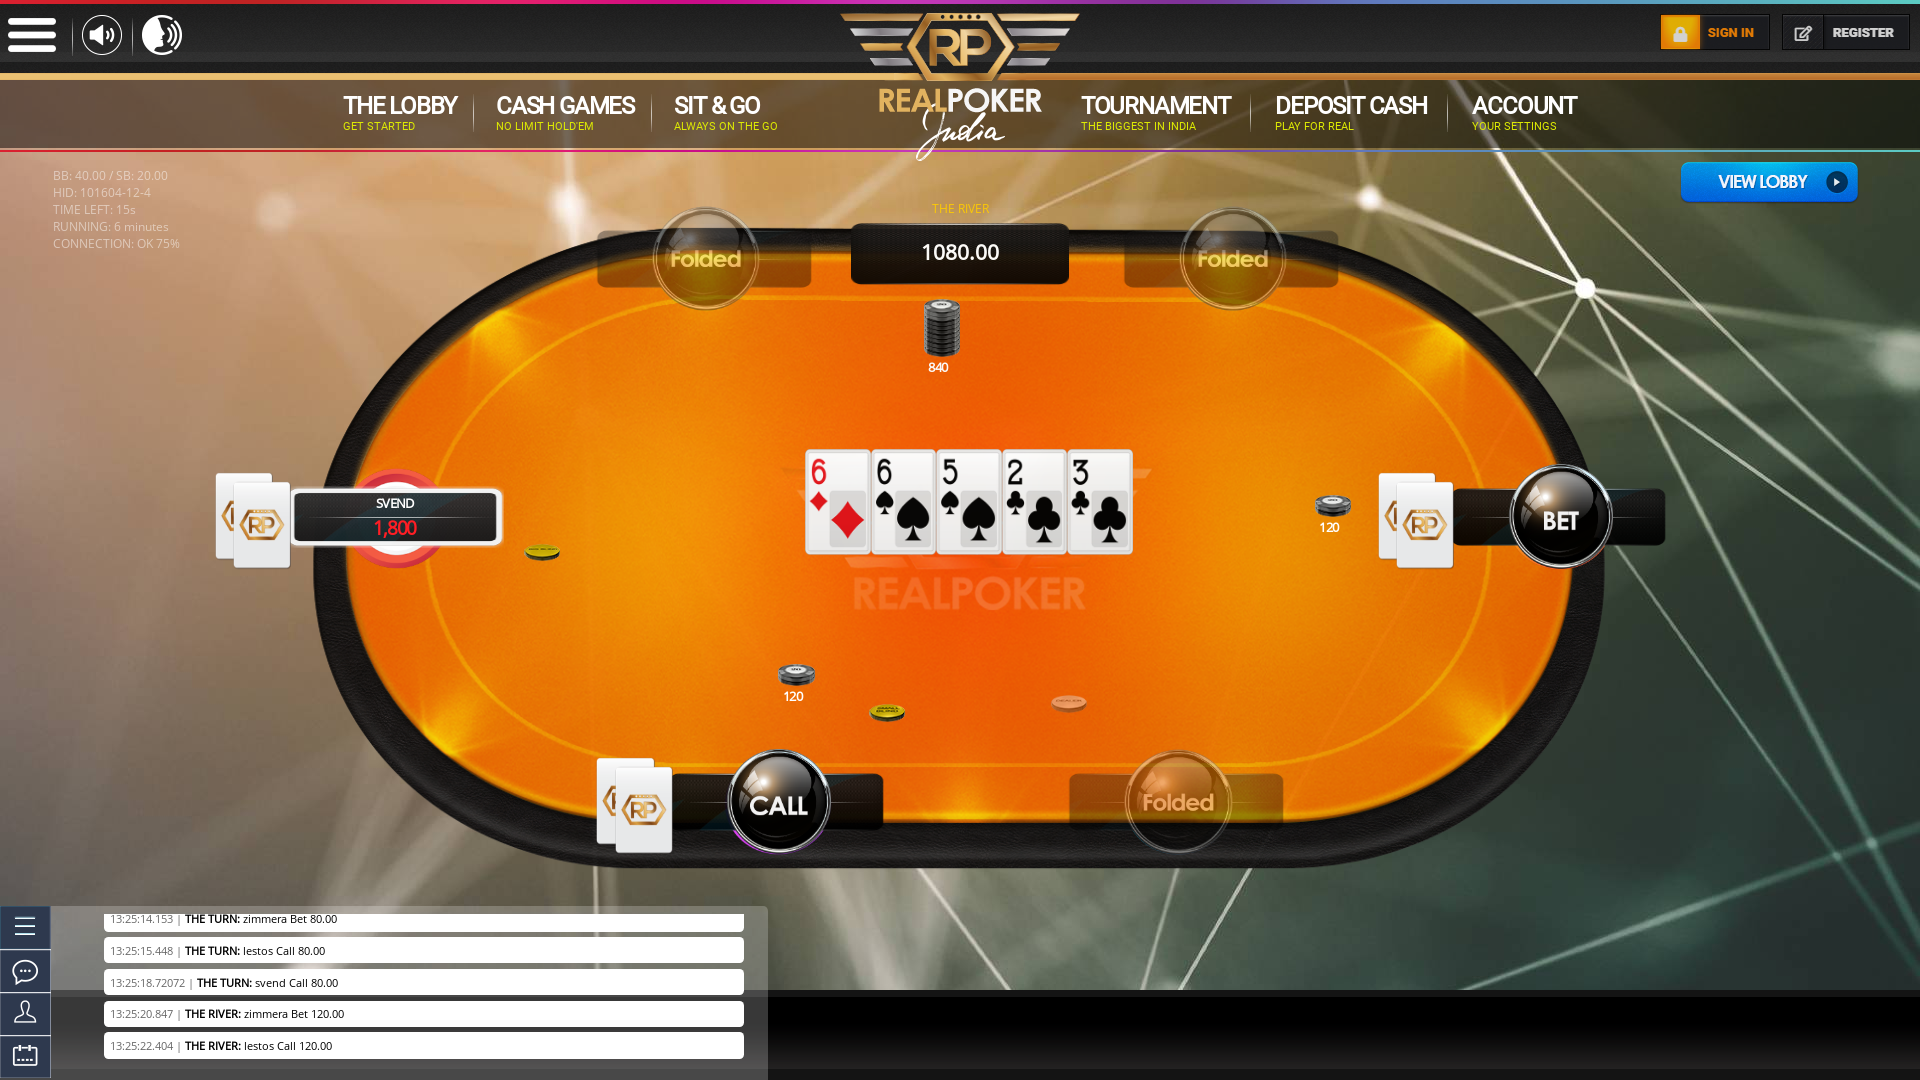 6 player texas holdem table at real poker with the table id 101604